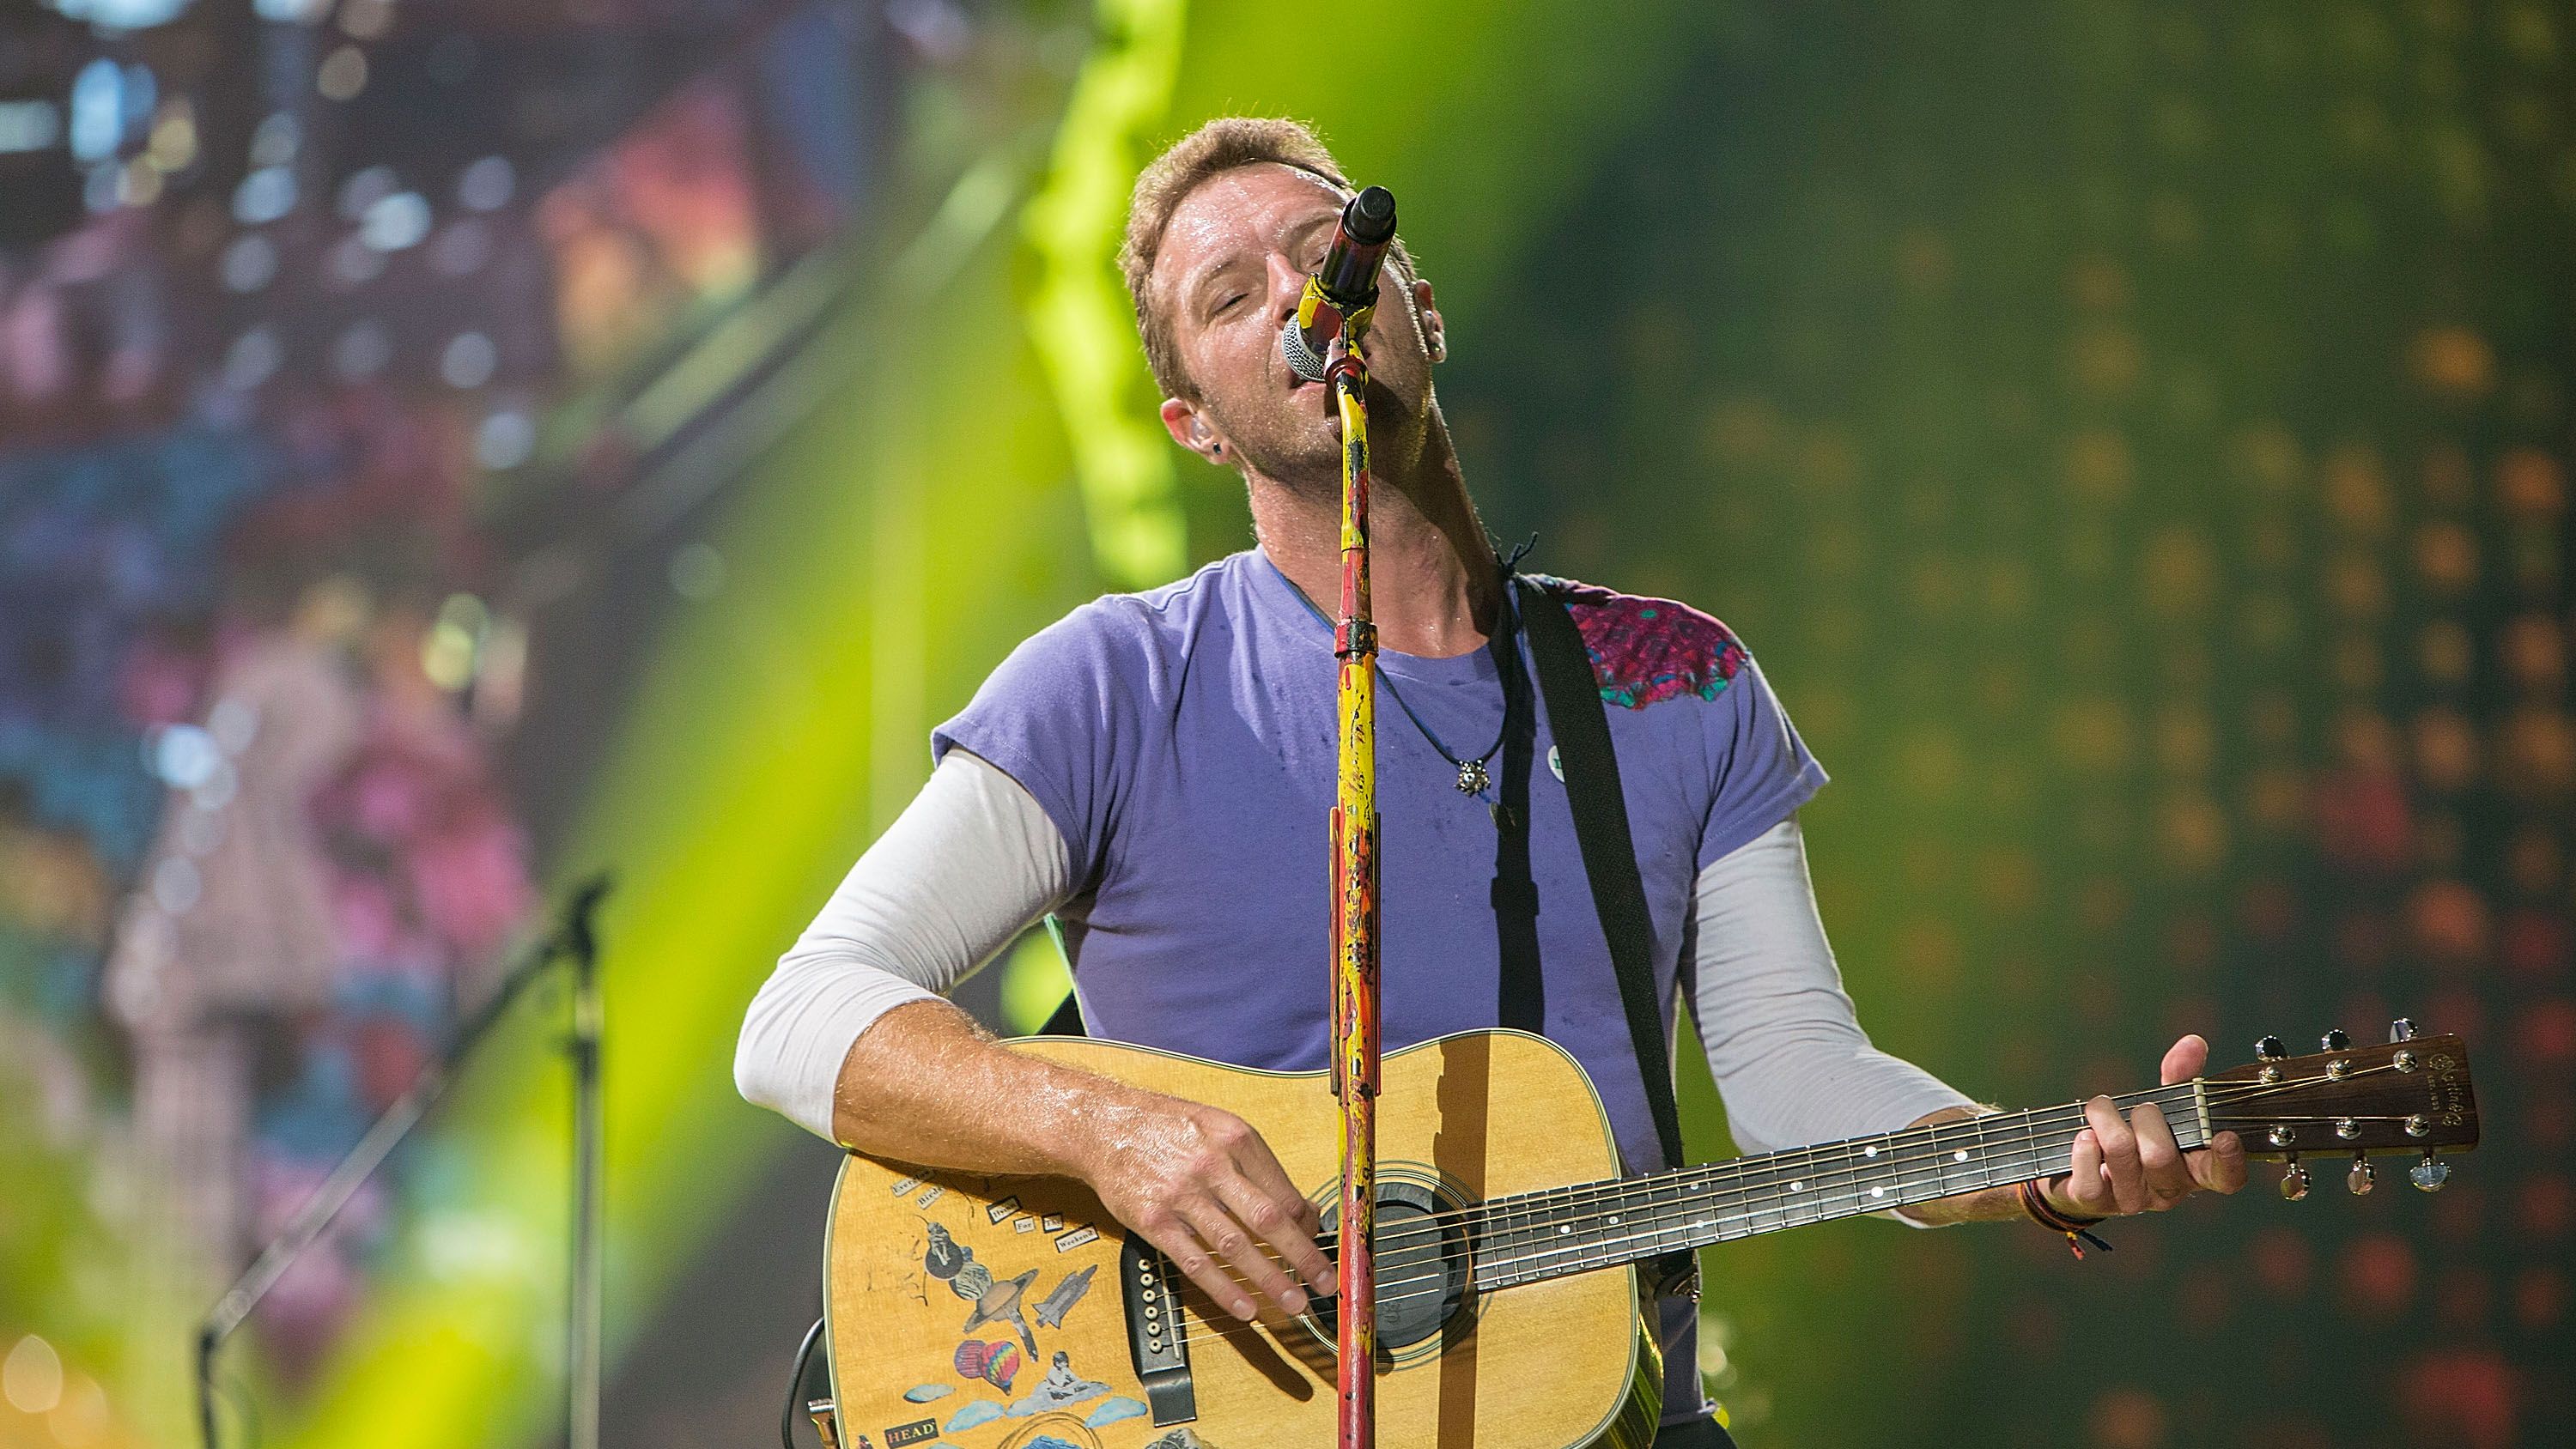 san diego, ca october 08 musician chris martin of coldplay performs on stage at sdccu stadium on october 8, 2022 in san diego, california photo by daniel knightongetty images